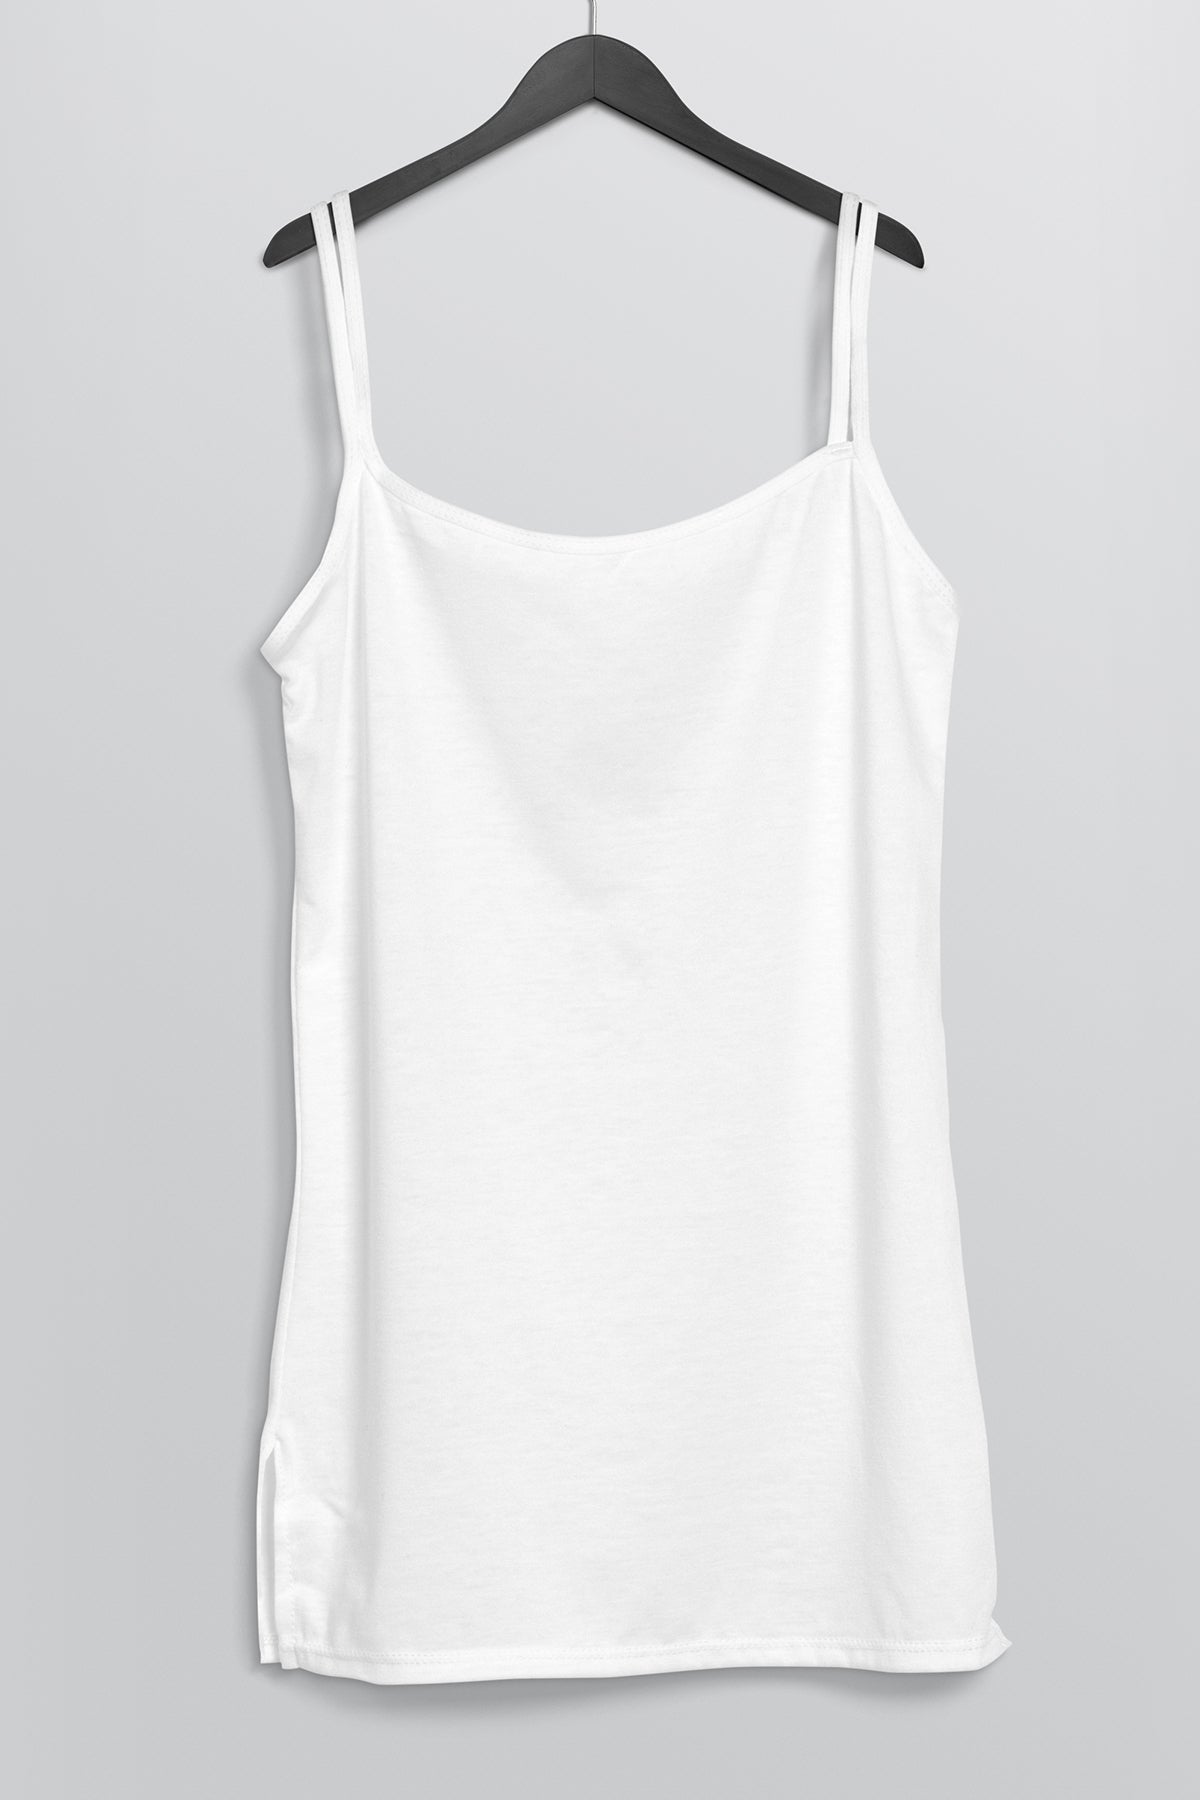 BLS - Colleen Stretchable Cotton Camisole - White